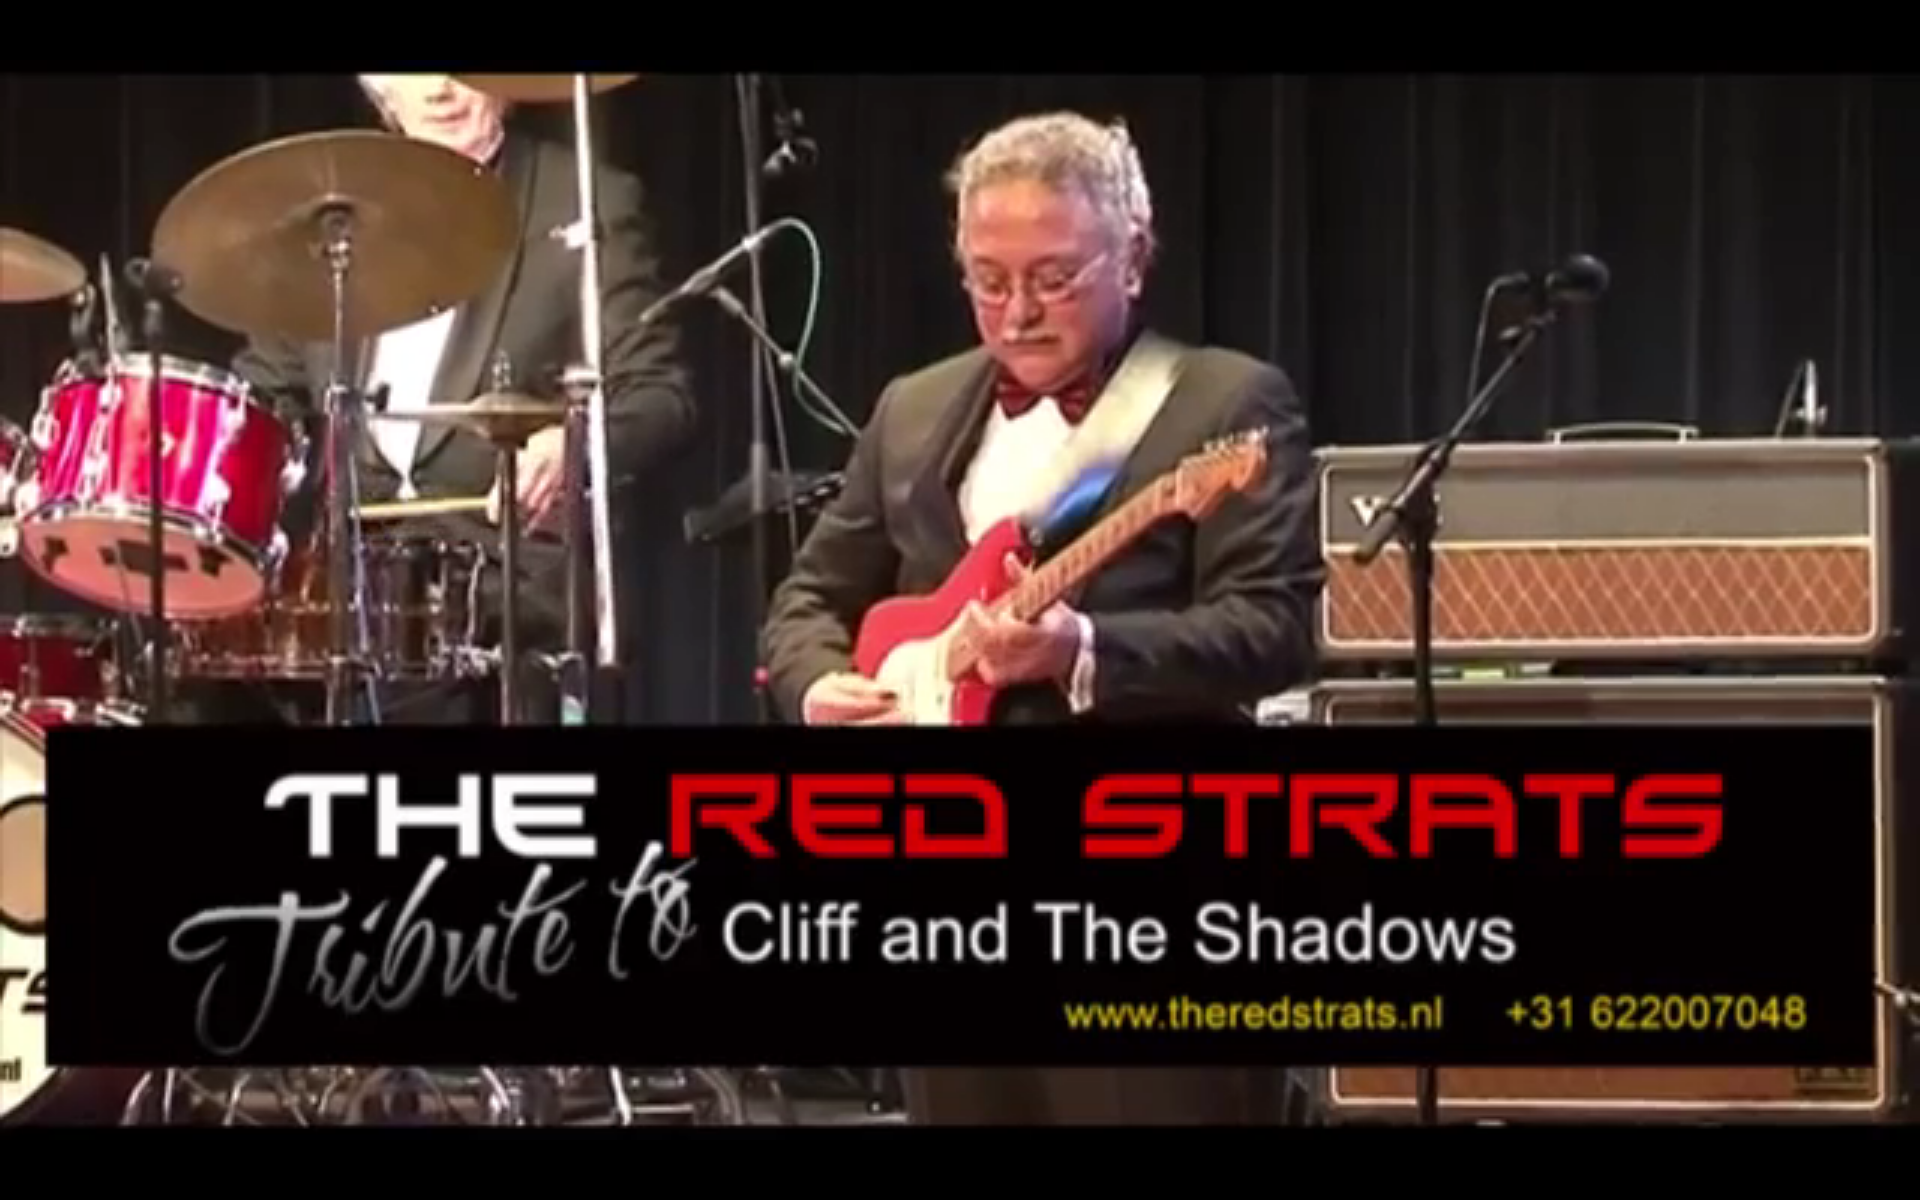 The Red Strats